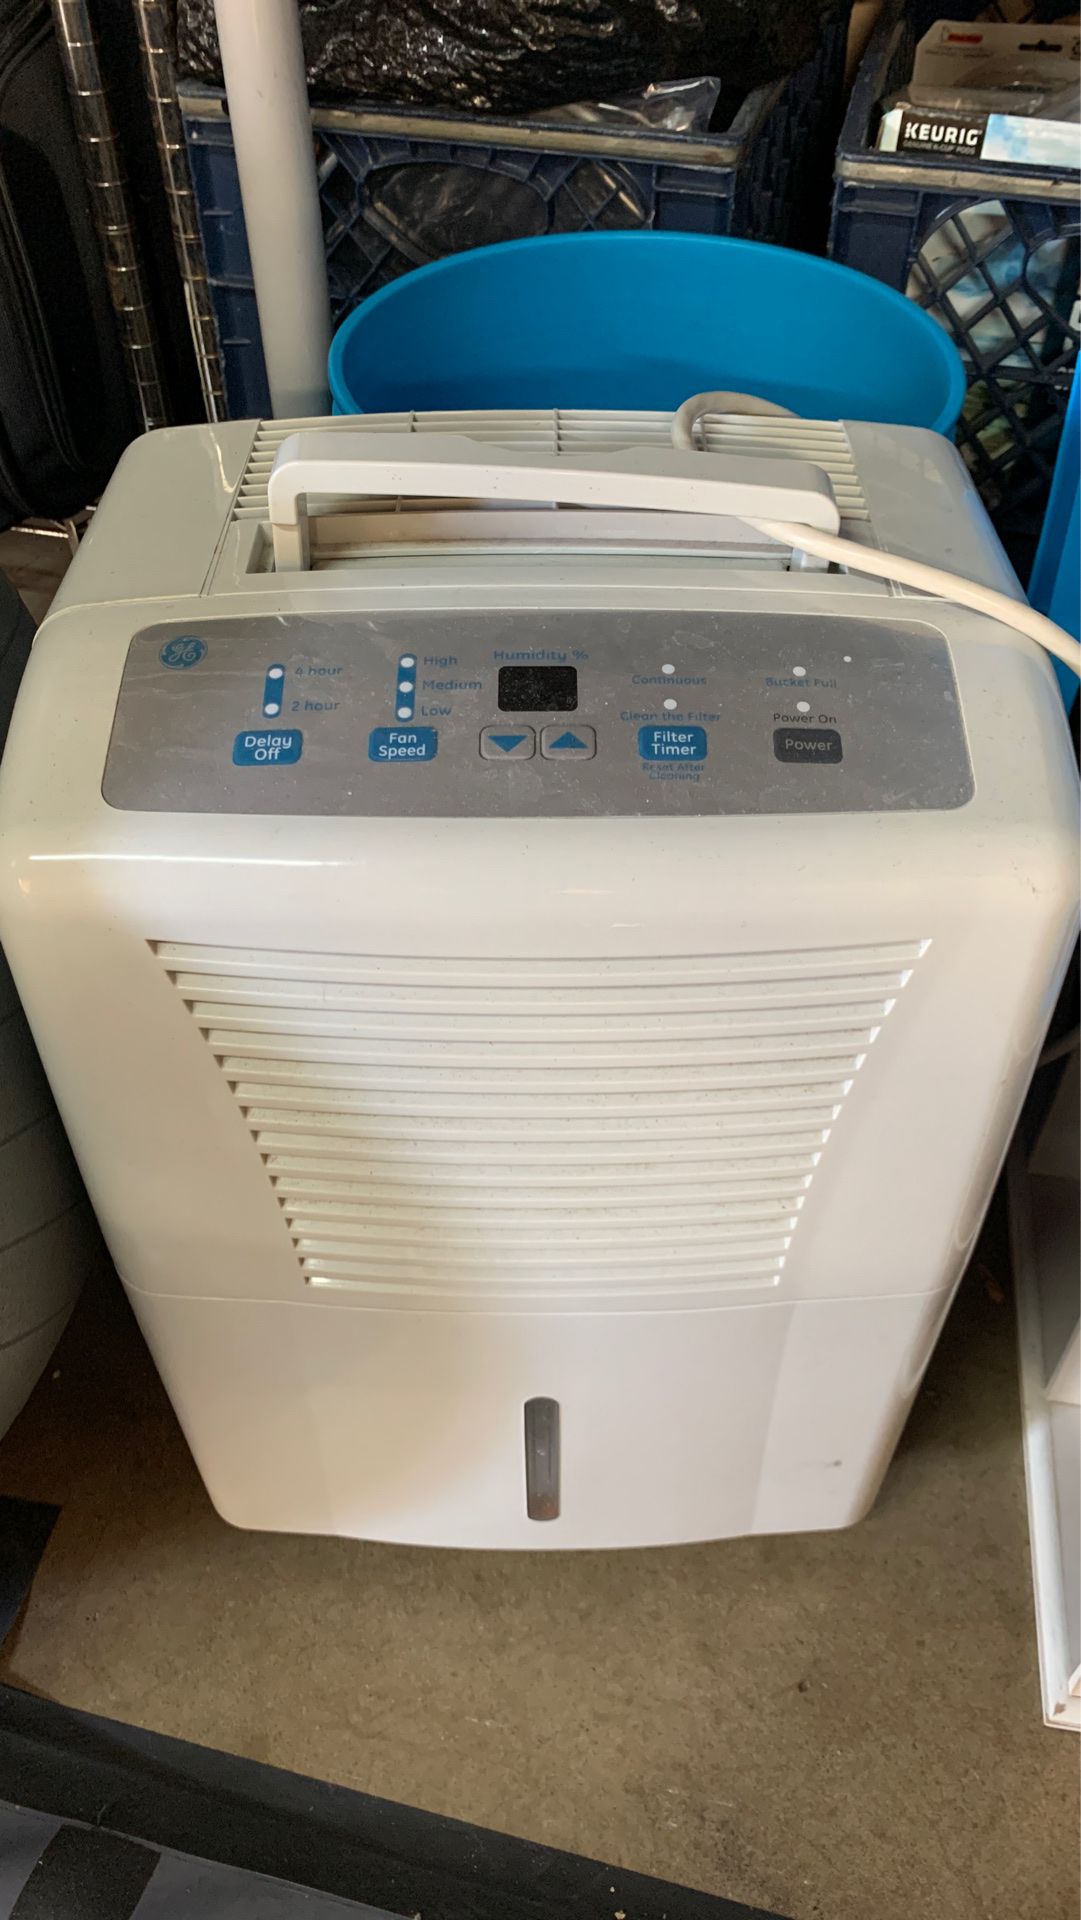 GE dehumidifier, 30 pint, with rollers